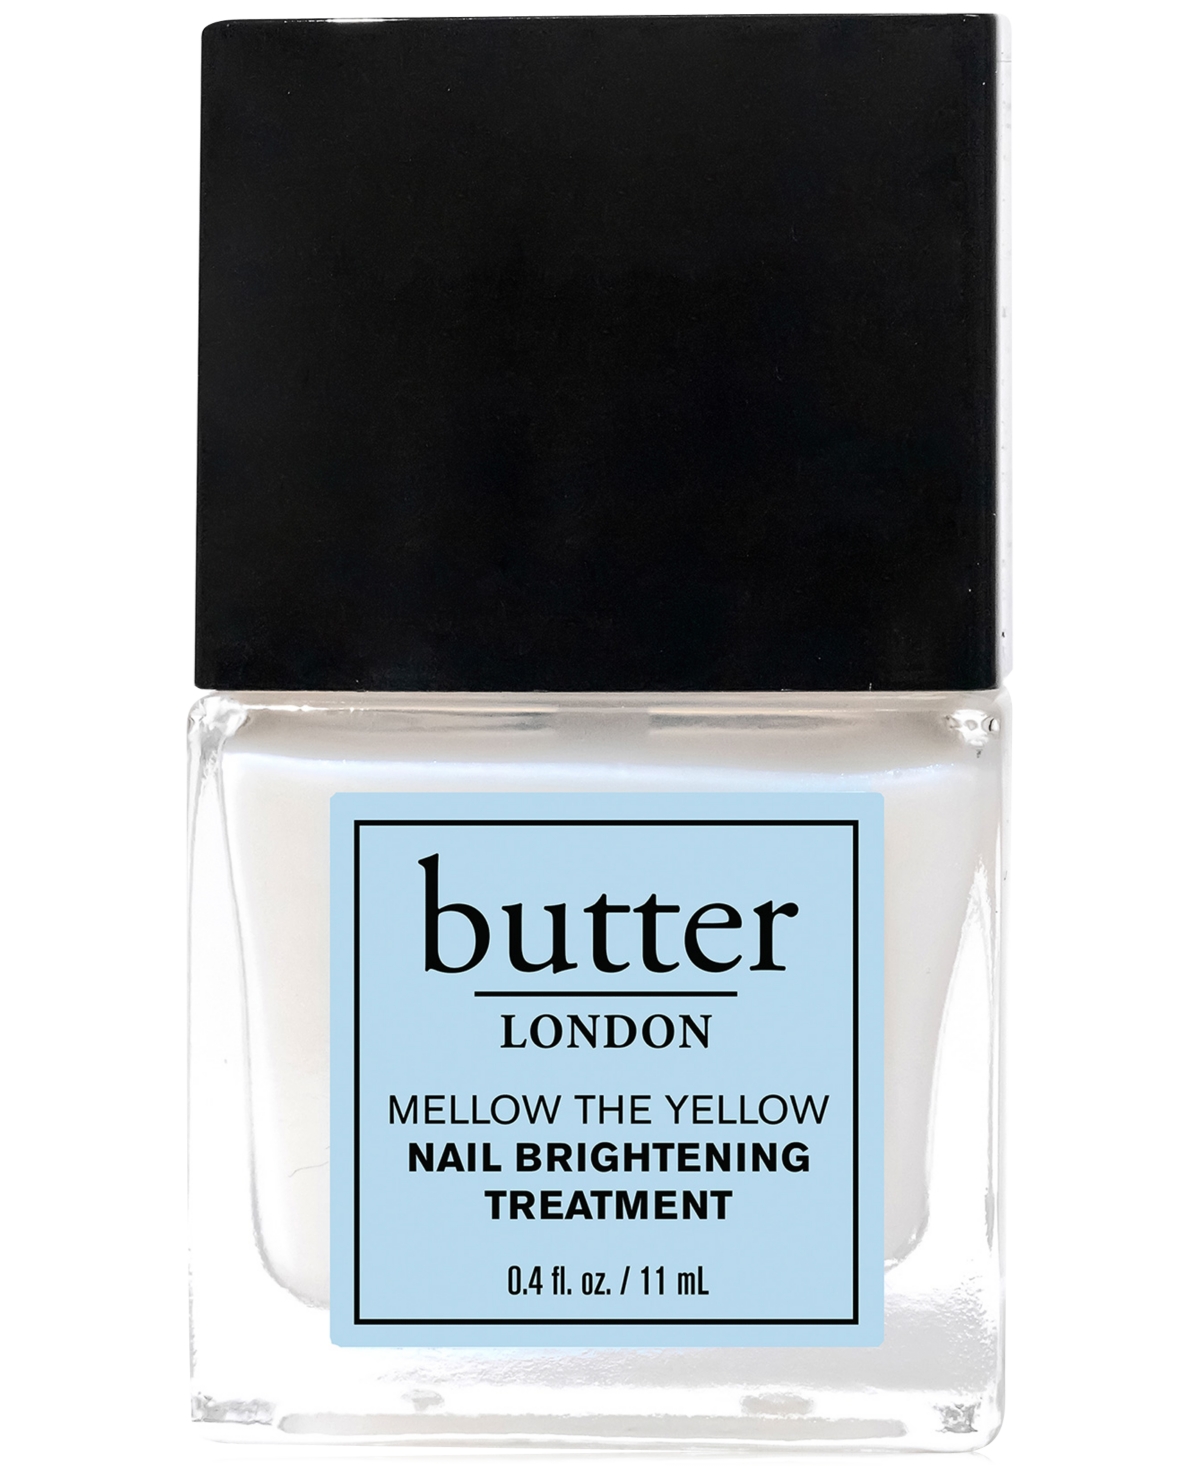 butter London Mellow The Yellow Nail Brightening Treatment